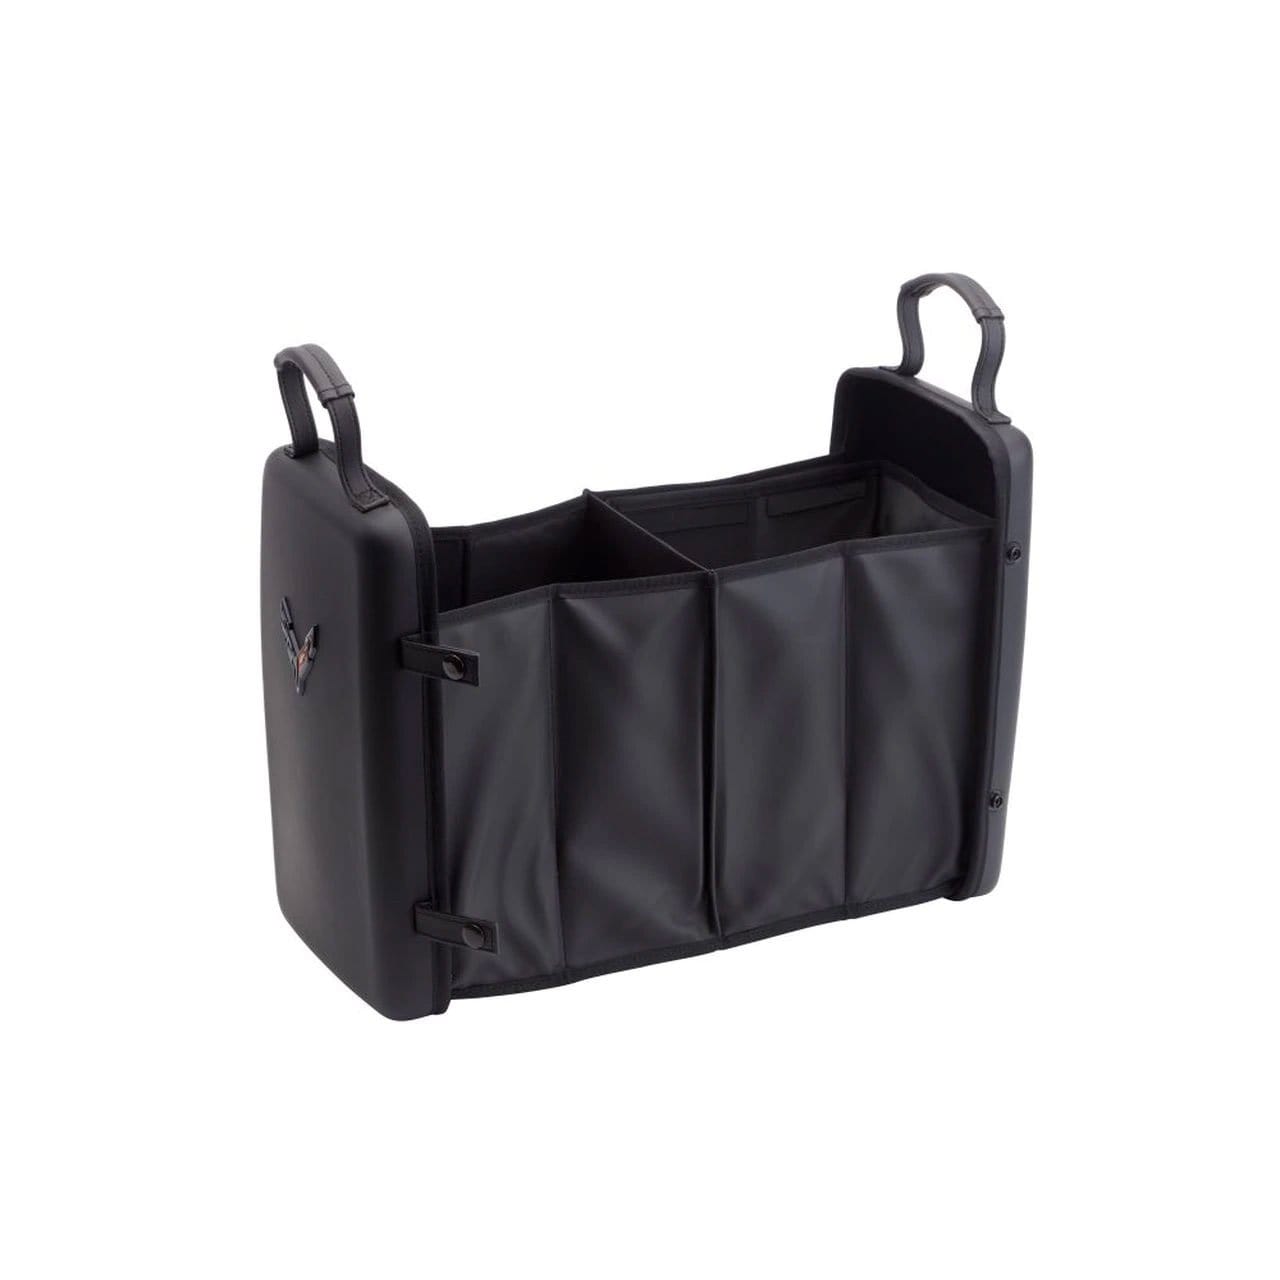 Chevrolet Collapsible Cargo Organizer for C8 Corvette Frunk [50-4-077]: Briefcase-style design with snap closures for easy storage and transportation.